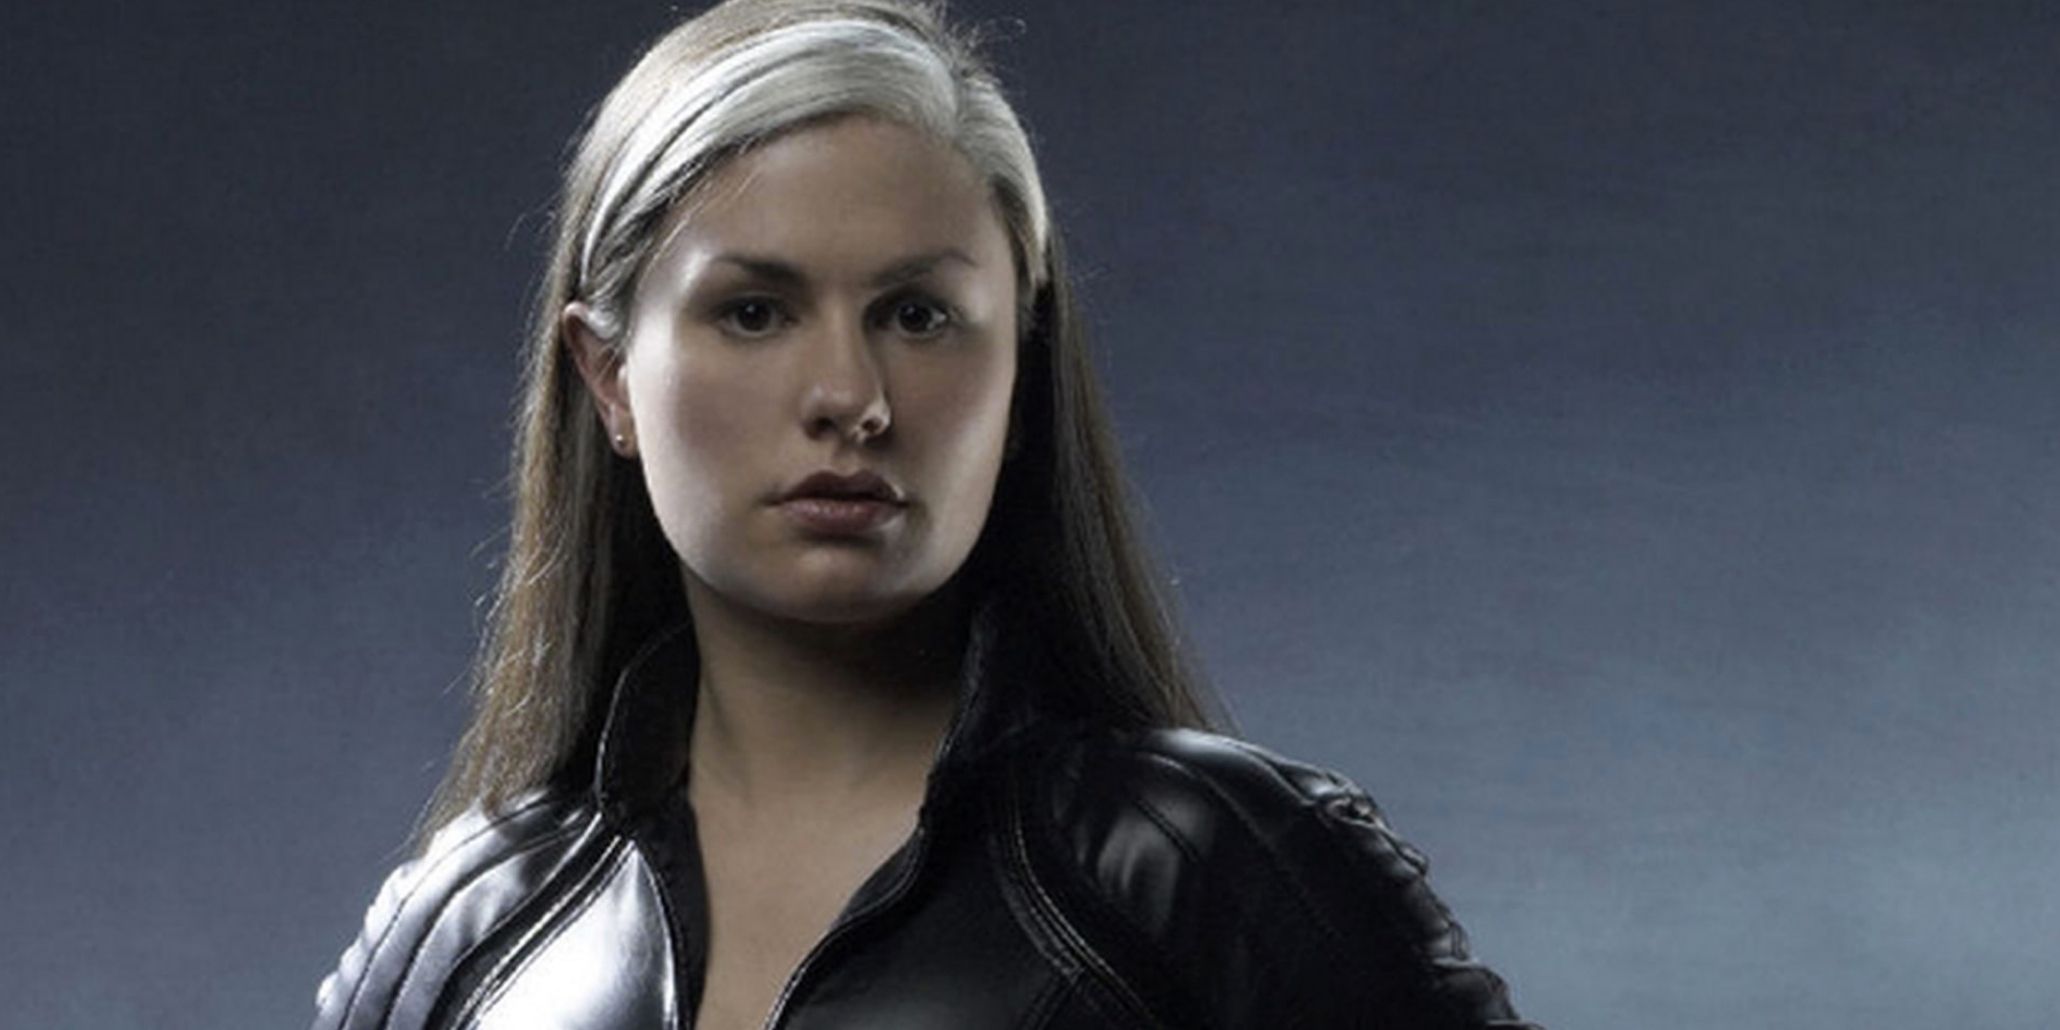 Anna Paquin As Rogue In X-Men